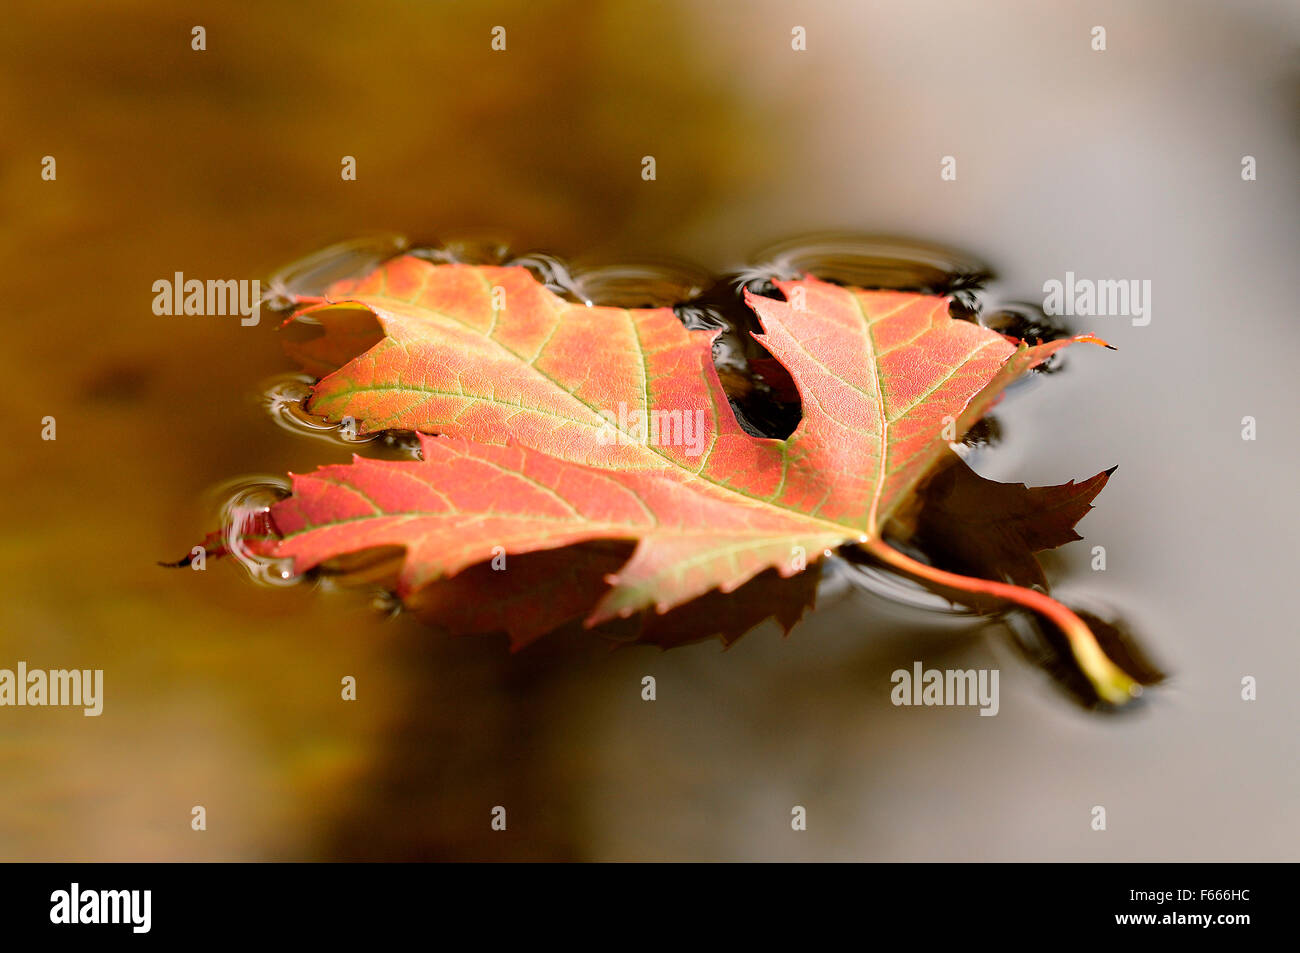 Silver maple leaf (Acer saccharinum), single autumnal colored leaf floating on the water surface, Germany Stock Photo